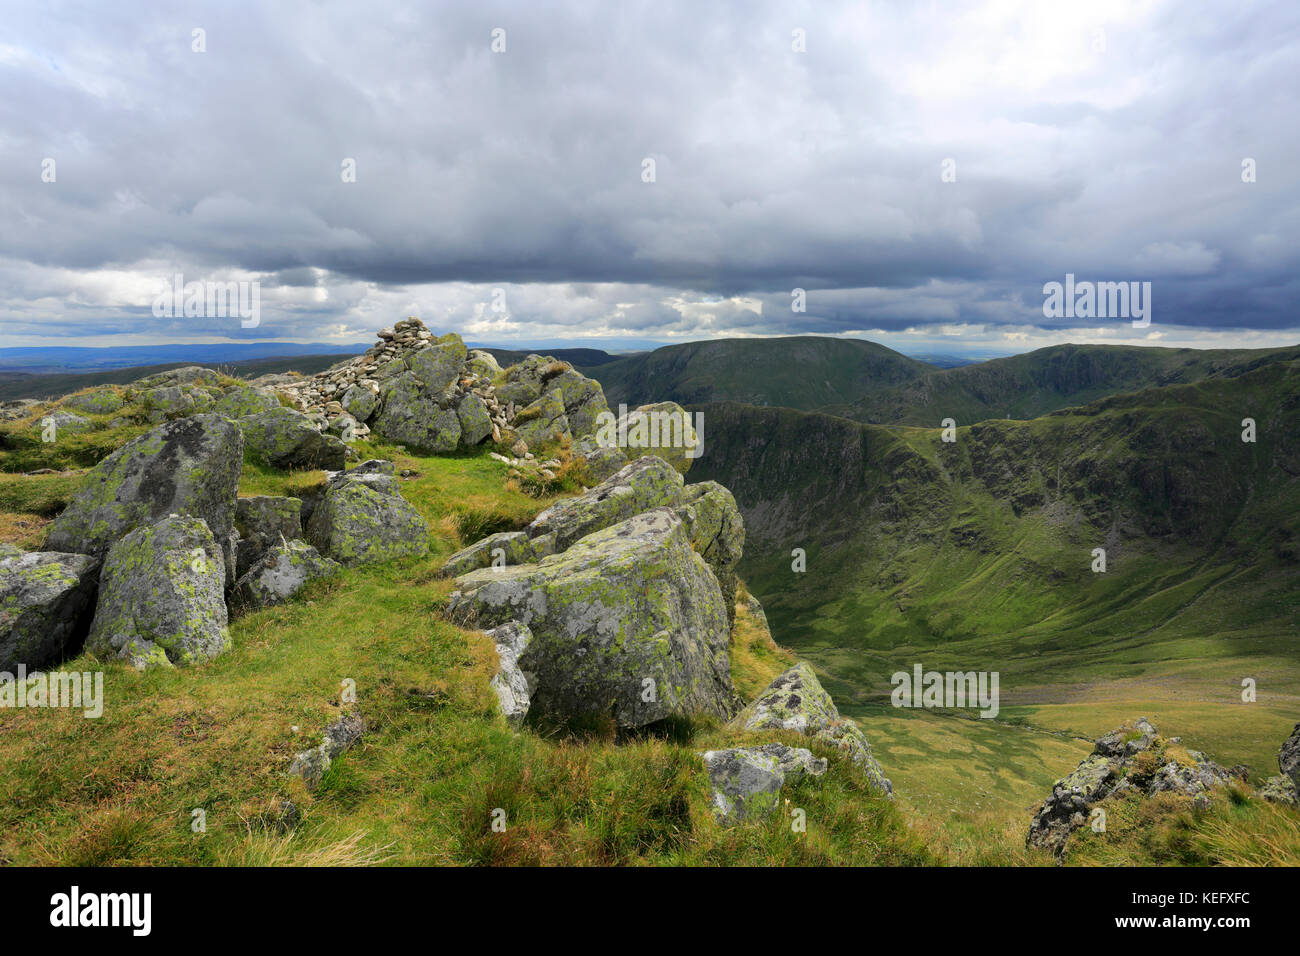 Summit of Kidsty Pike fell, Lake District National Park, Cumbria County, England, UK.             Kidsty Pike fell is one of the 214 Wainwright Walks  Stock Photo